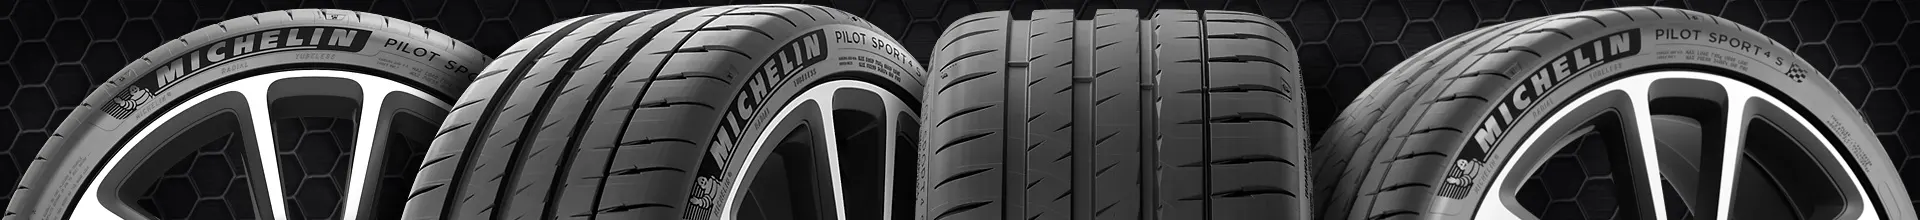 245 75 17 discount tires from Online Wheels Direct